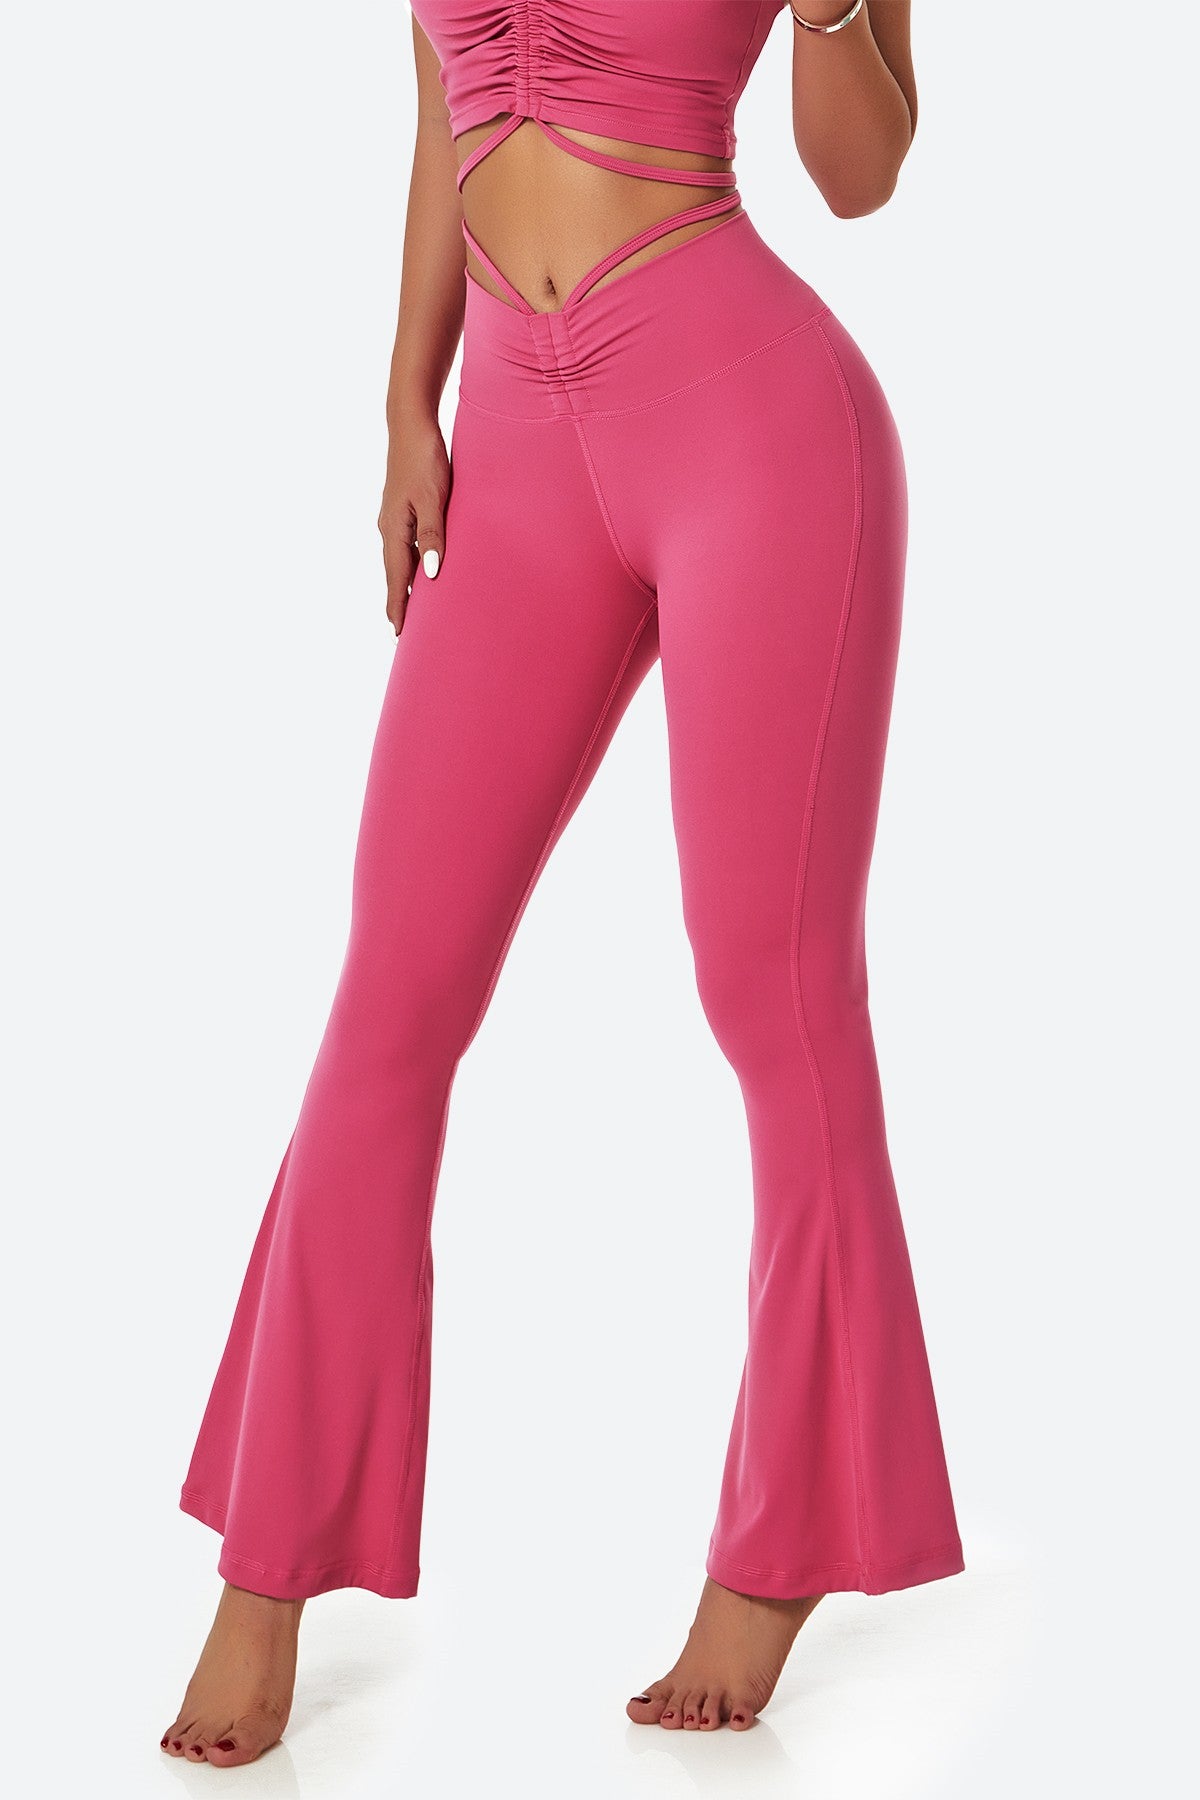 Ruched Front Waist Tie V-Cut Flared Leggings